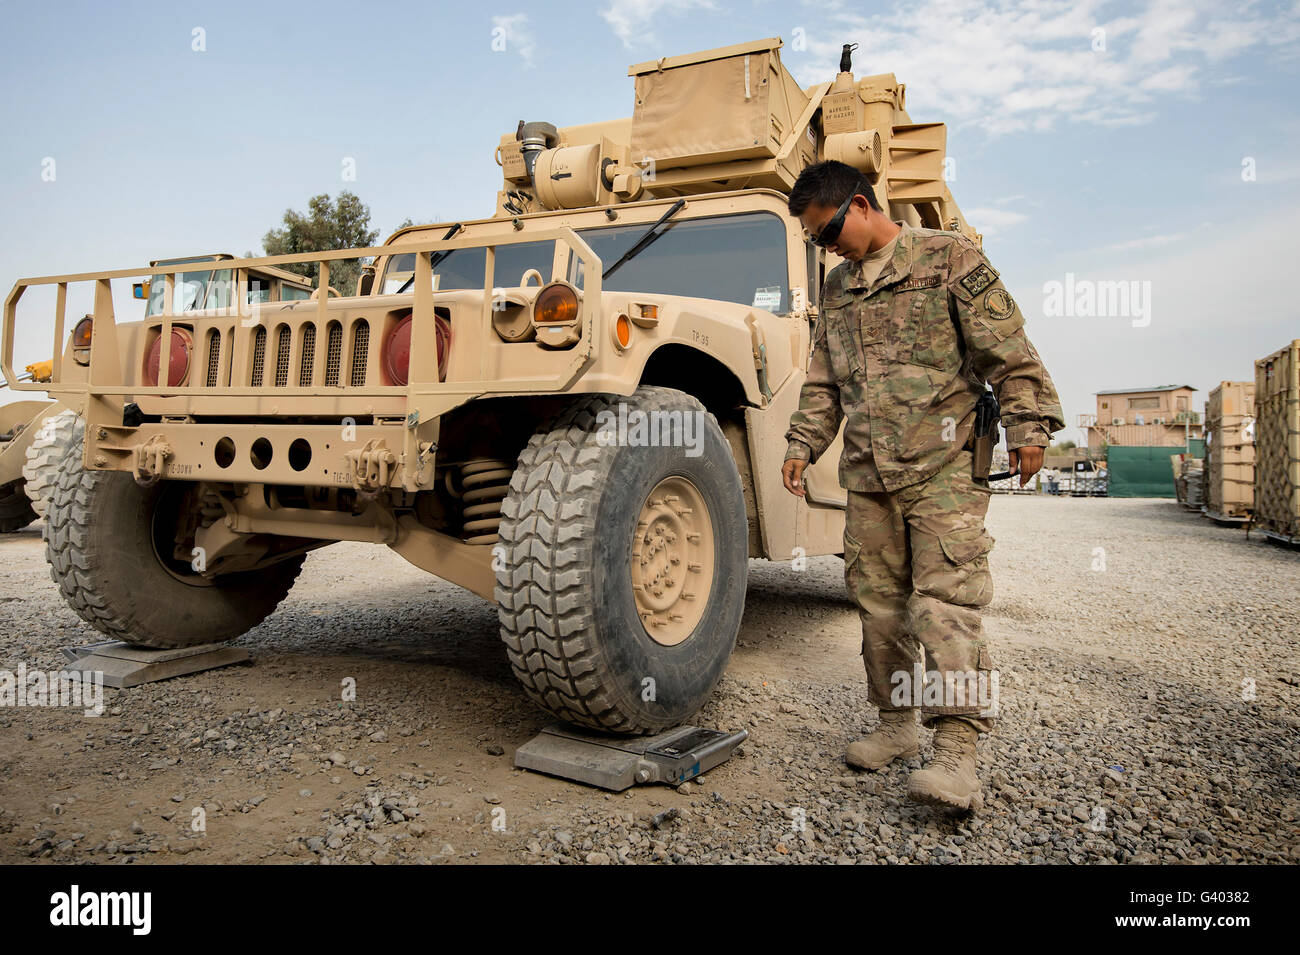 Airman checks the weight of a vehicle in Afghanistan. Stock Photo